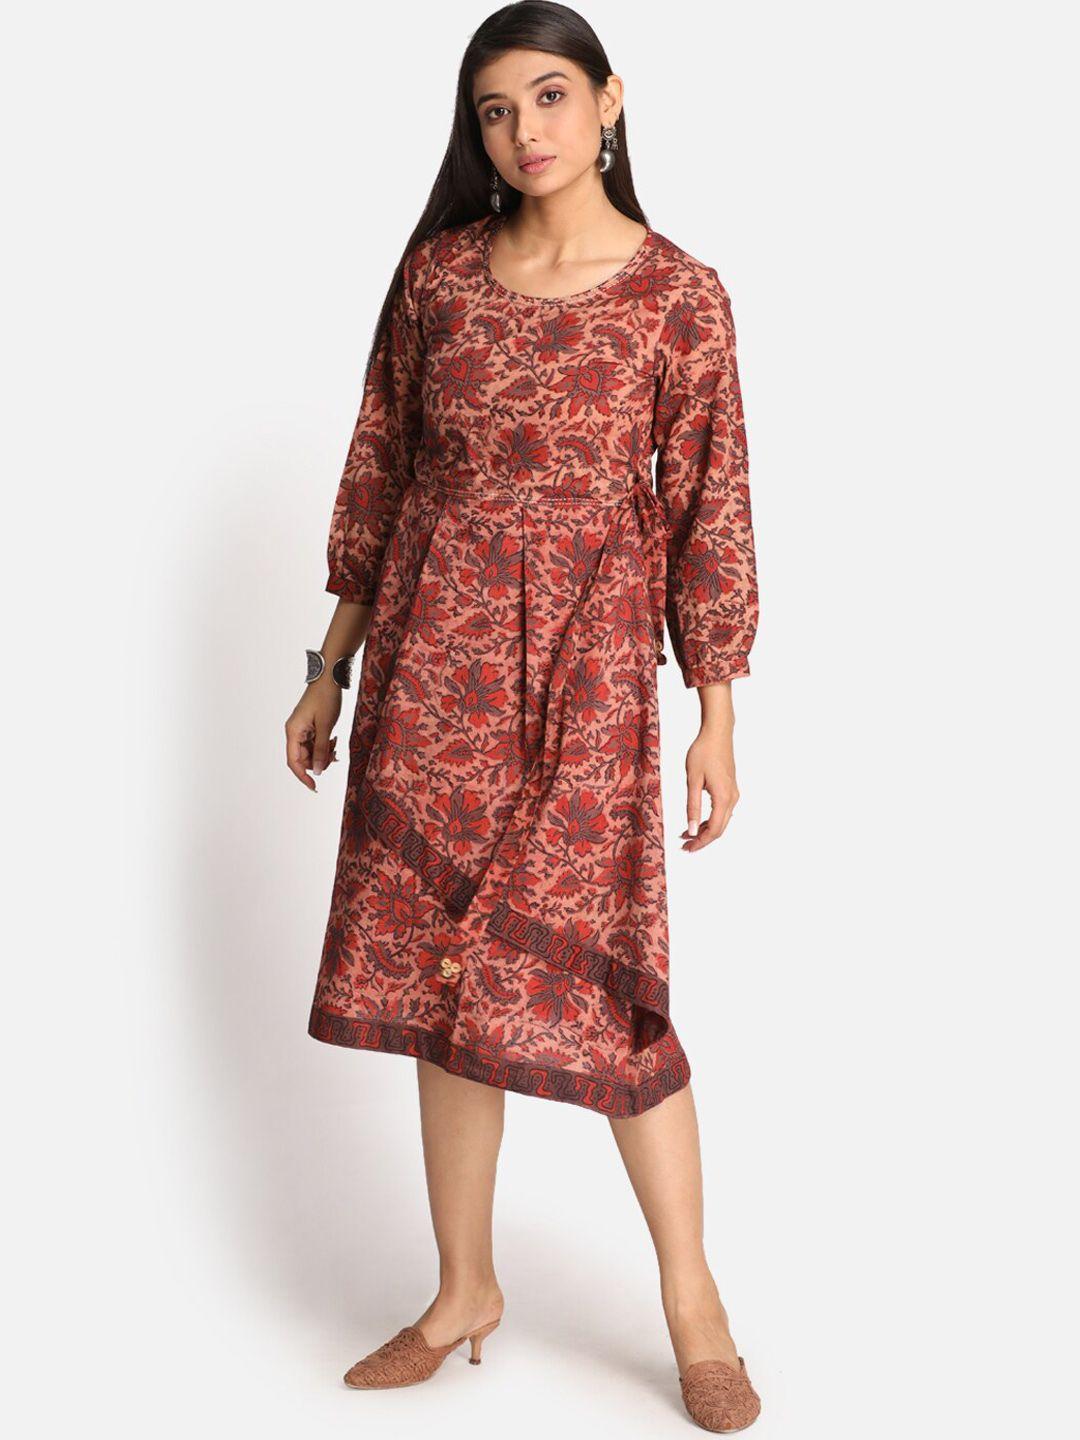 earthwear women rust floral printed a-line layered ethnic dress